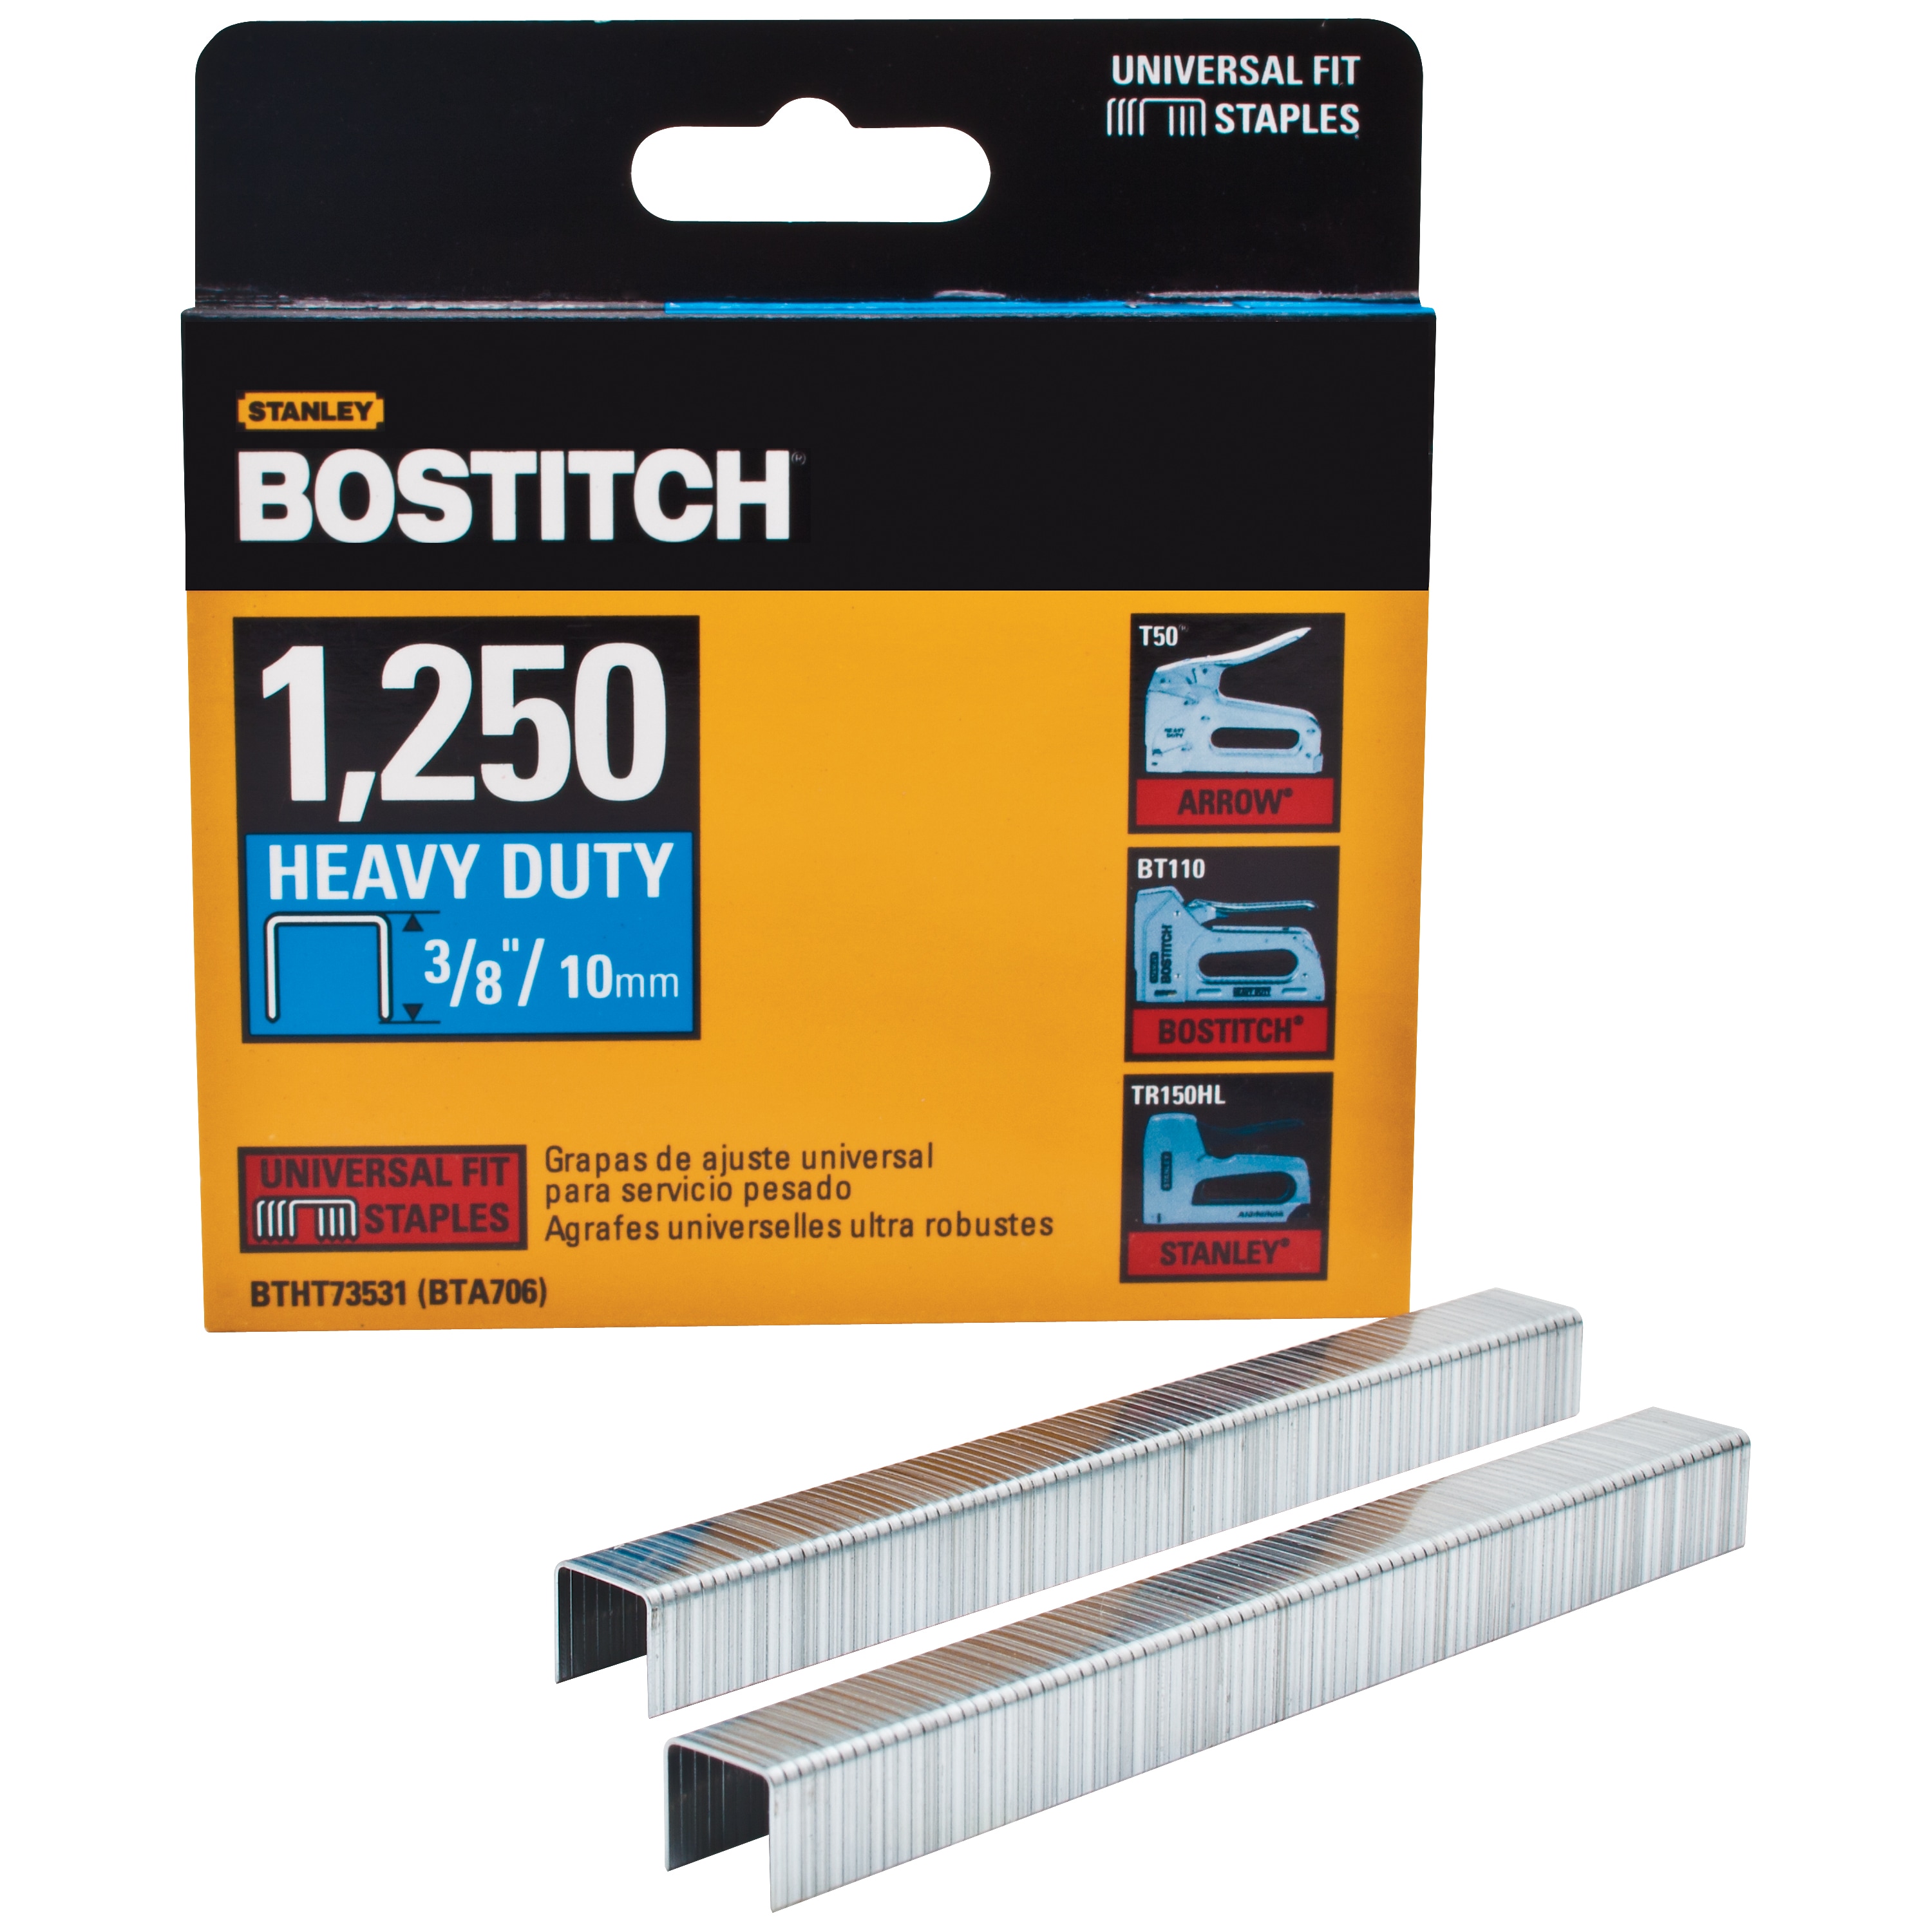 Bostitch BOSTITCH 72 TYPE STAPLES 10MM 24 BOXES / 240,000 STAPLES 5902013935452 1 CARTON 